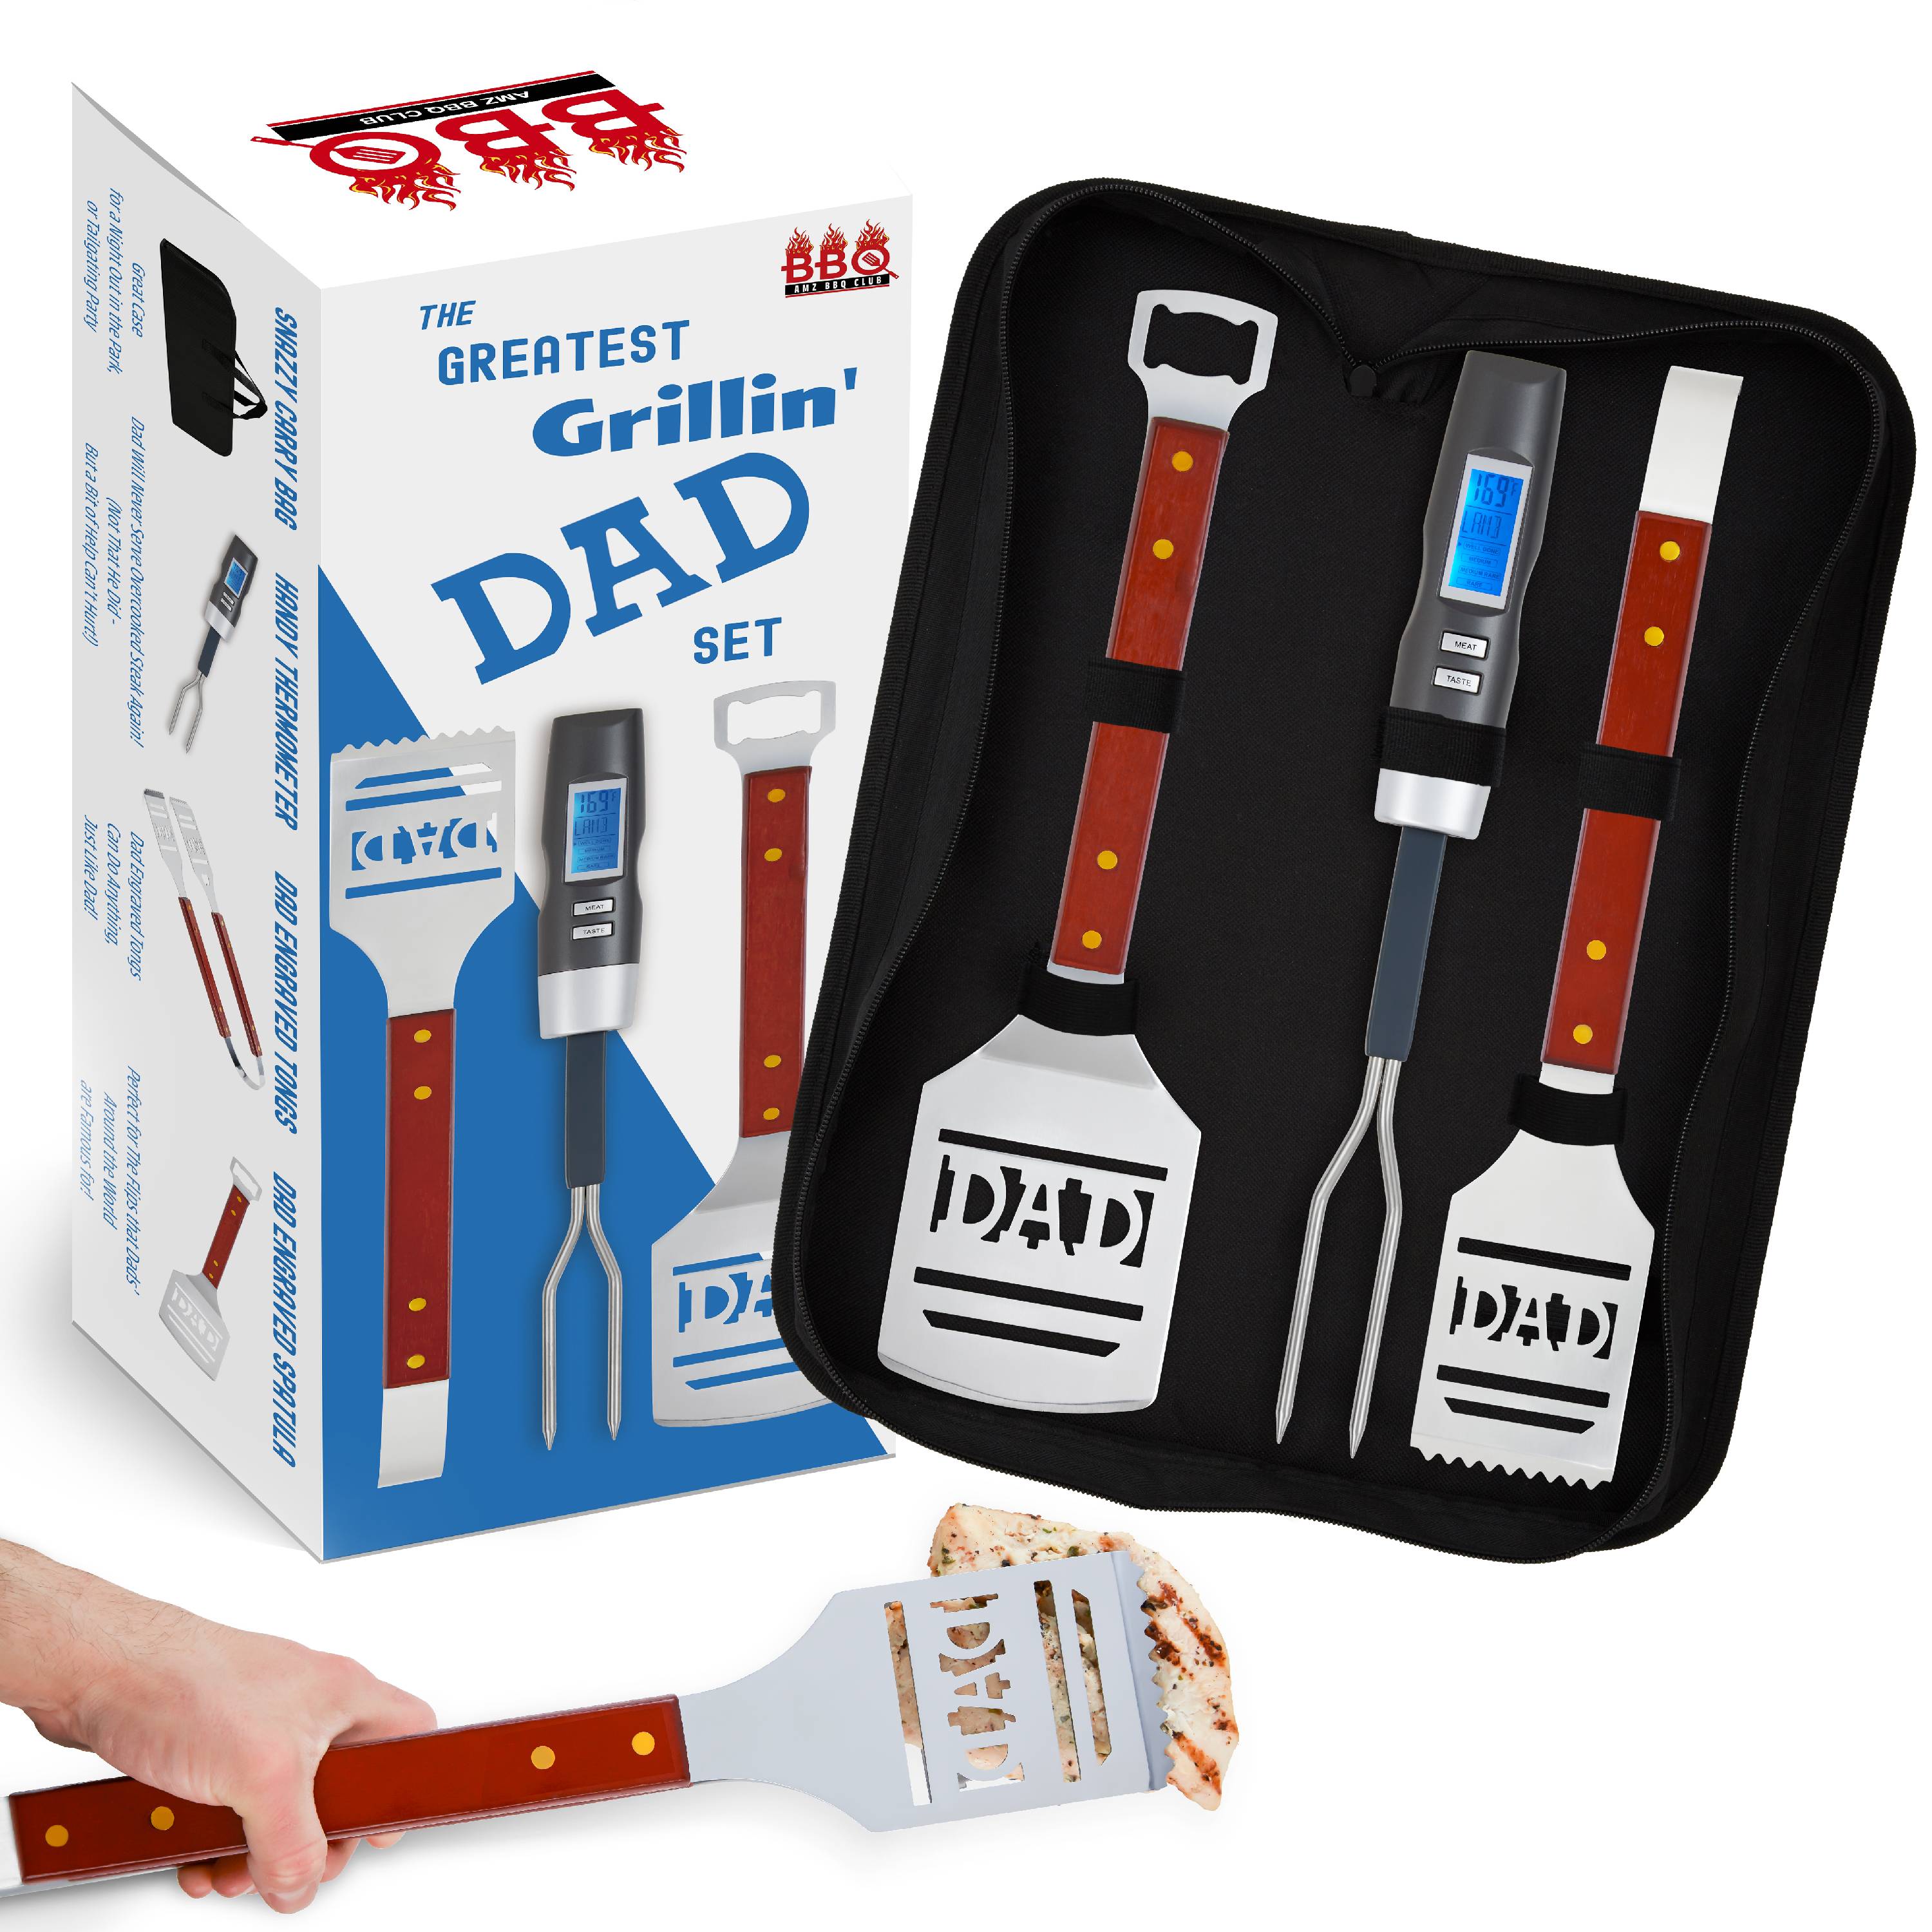 Dad BBQ Grill Set with Carry Case - 4-Piece Includes Spatula, Tongs, Digital Thermometer and Case - Great Gift for Father's Day, Dad's Birthday or Anytime for Dad - image 1 of 6